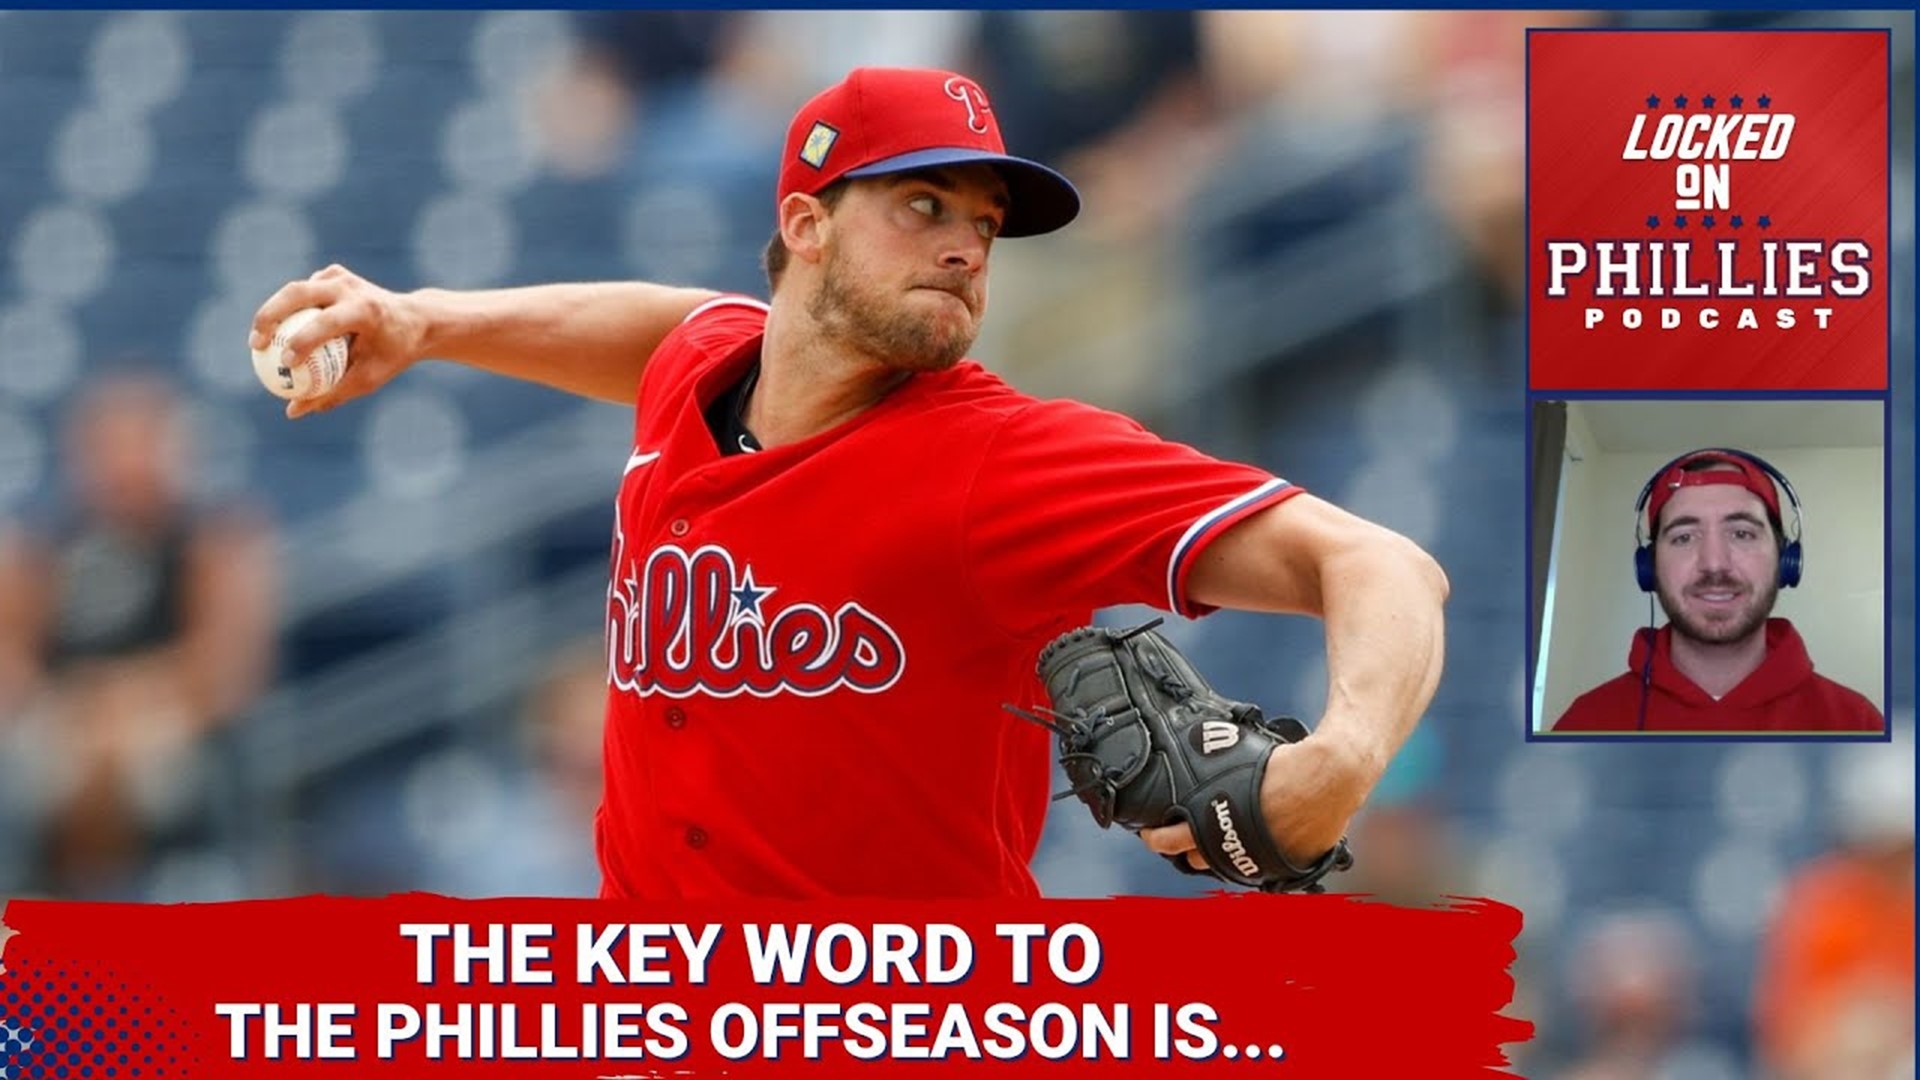 Connor shares his thoughts on why this virtue will be the most important word for the Philadelphia Phillies' offseason for the front office.